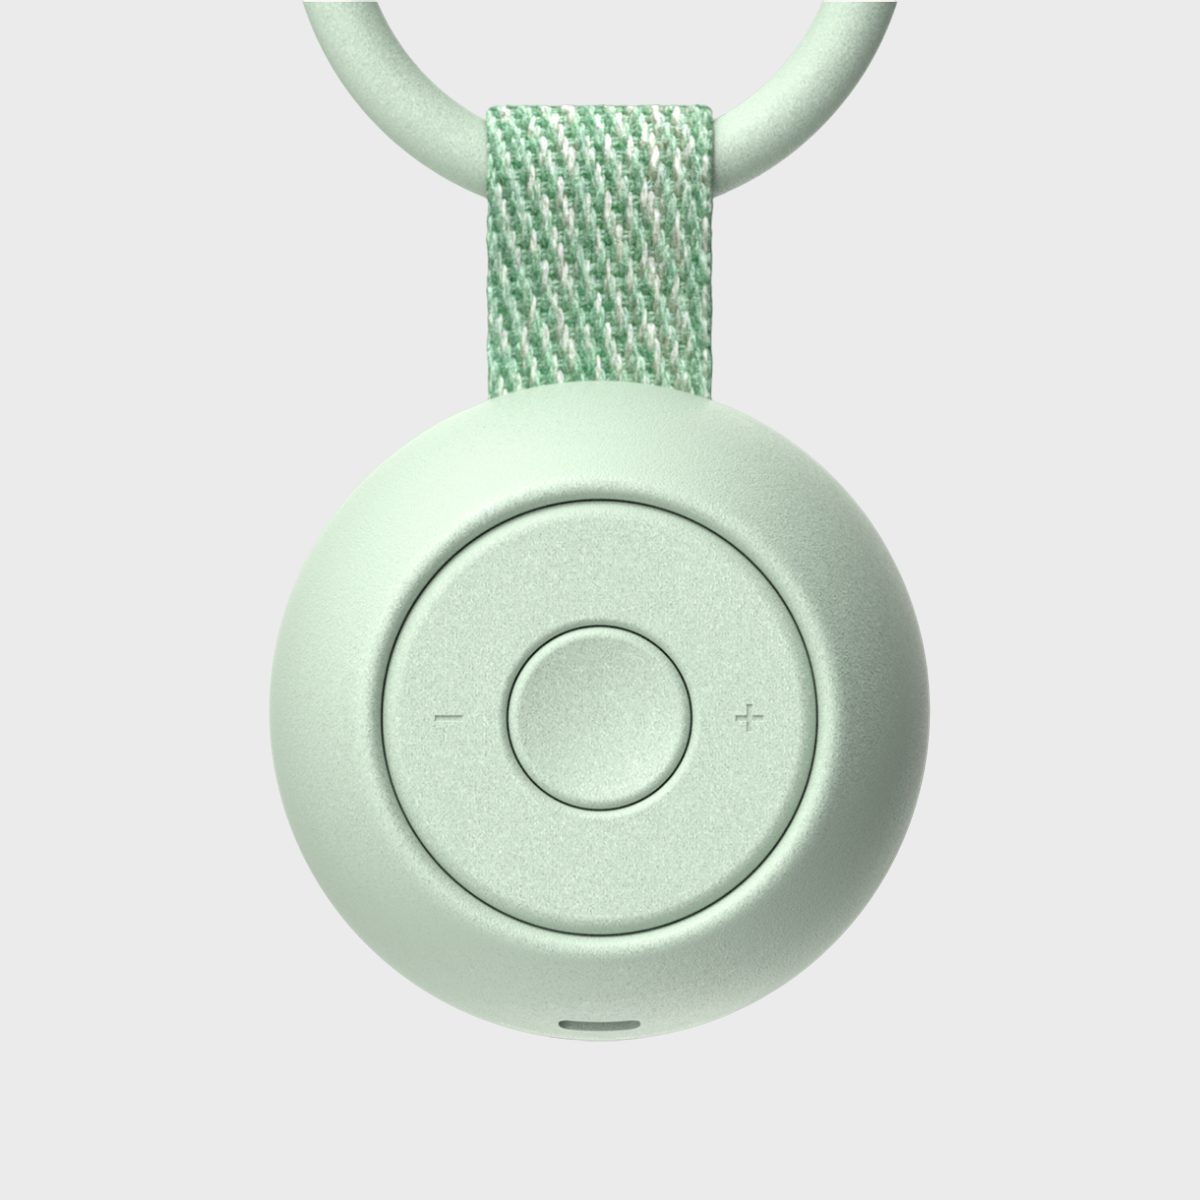 <p>If you love your <a href="https://www.rd.com/article/hatch-restore-review/" rel="noopener noreferrer">Hatch Restore</a>, then it'll come as no surprise that Hatch's latest sound machine is a must when shopping for baby gifts for parents (and babies) who travel. This <a href="https://www.hatch.co/rest-go" rel="noopener noreferrer">portable sound machine</a> has ten soothing sleep sounds that will lull babies to sleep no matter where they're headed. My six-month-old hates her car seat and doesn't typically fall asleep in the car.</p> <p>But I started clipping this to the seat before long drives, and it has been a complete game changer. It has a rechargeable battery and is only about the size of a small apple, which makes it easy to keep in the diaper bag. And unlike other Hatch products, the Rest Go doesn't require Bluetooth or Wi-Fi. Just grab and go.</p> <p class="listicle-page__cta-button-shop"><a class="shop-btn" href="https://www.hatch.co/rest-go">Shop Now</a></p>